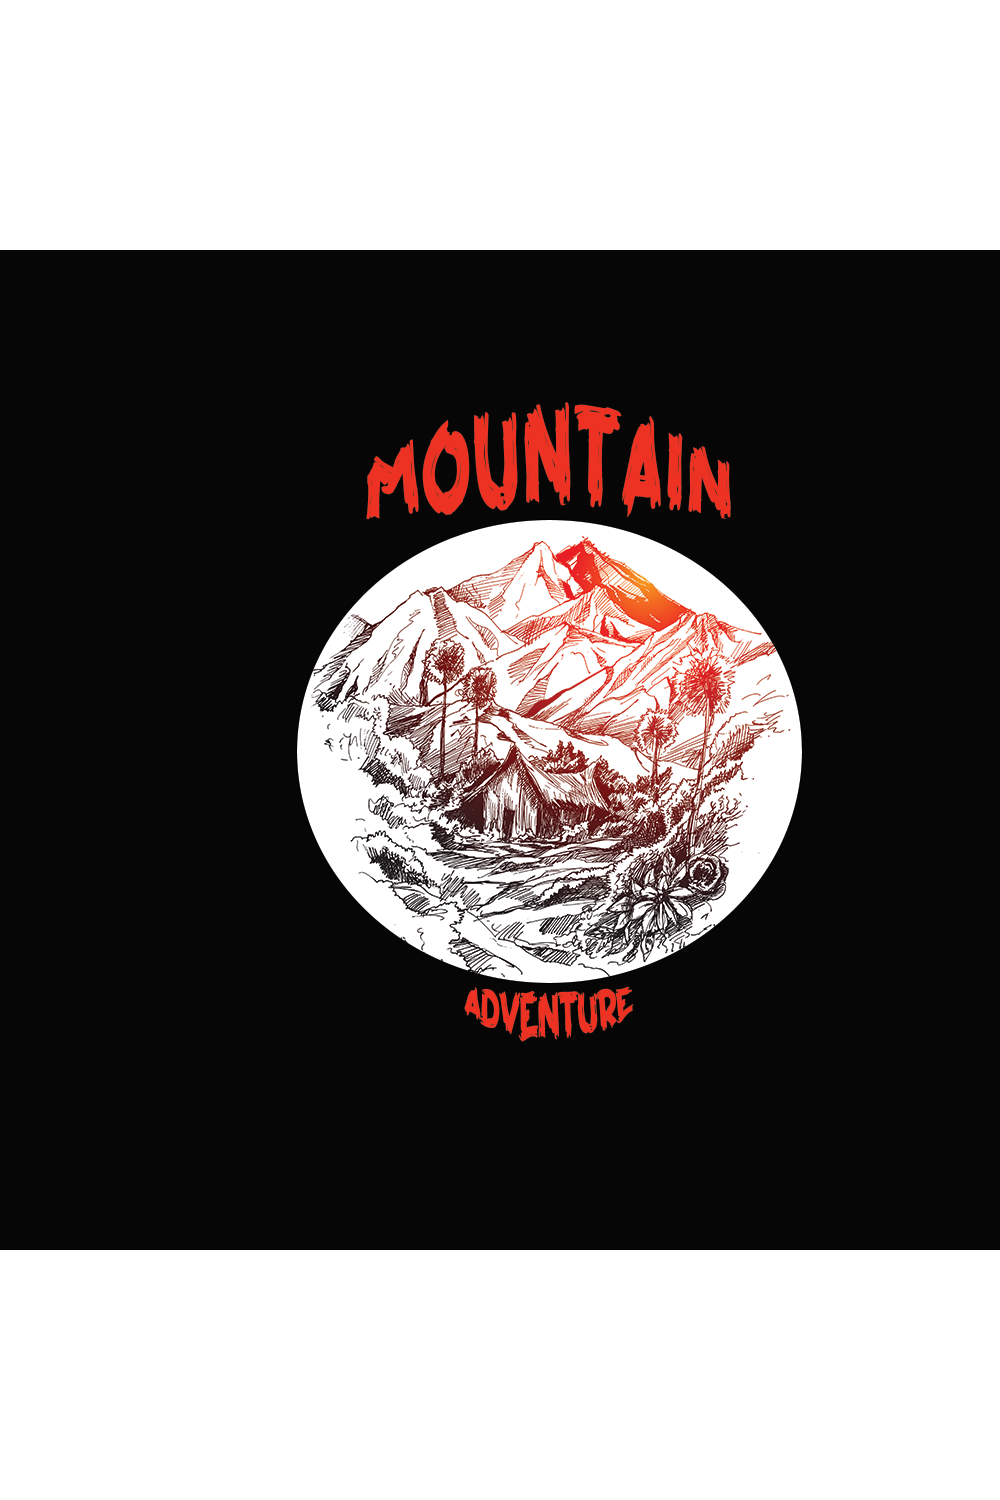 Tshirt Designs - Vintage Mountains pinterest preview image.